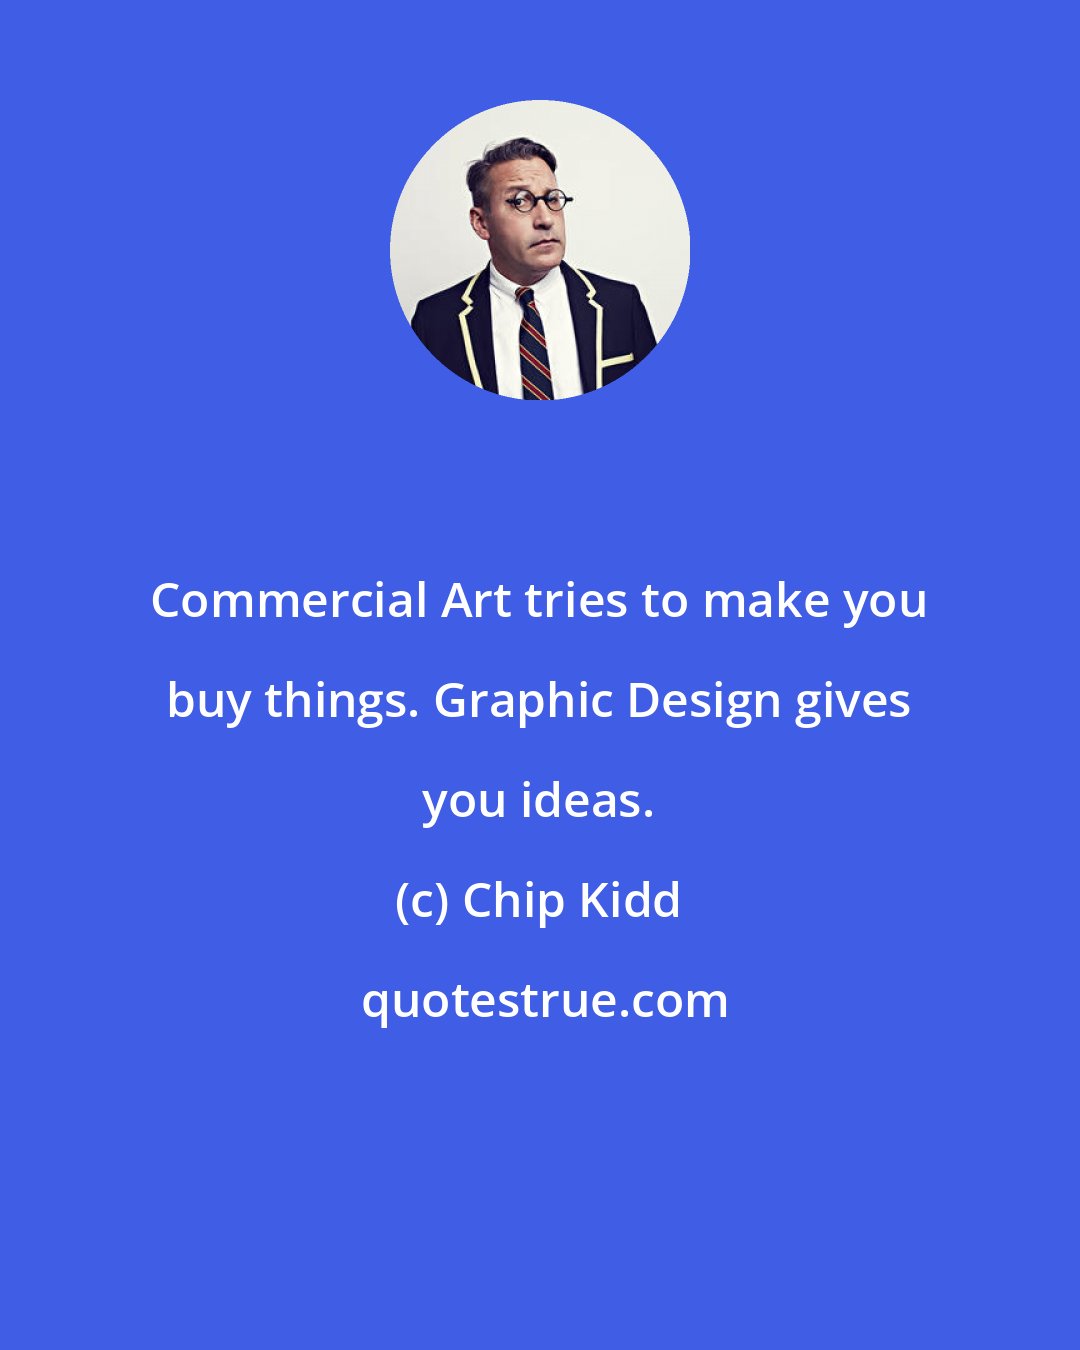 Chip Kidd: Commercial Art tries to make you buy things. Graphic Design gives you ideas.